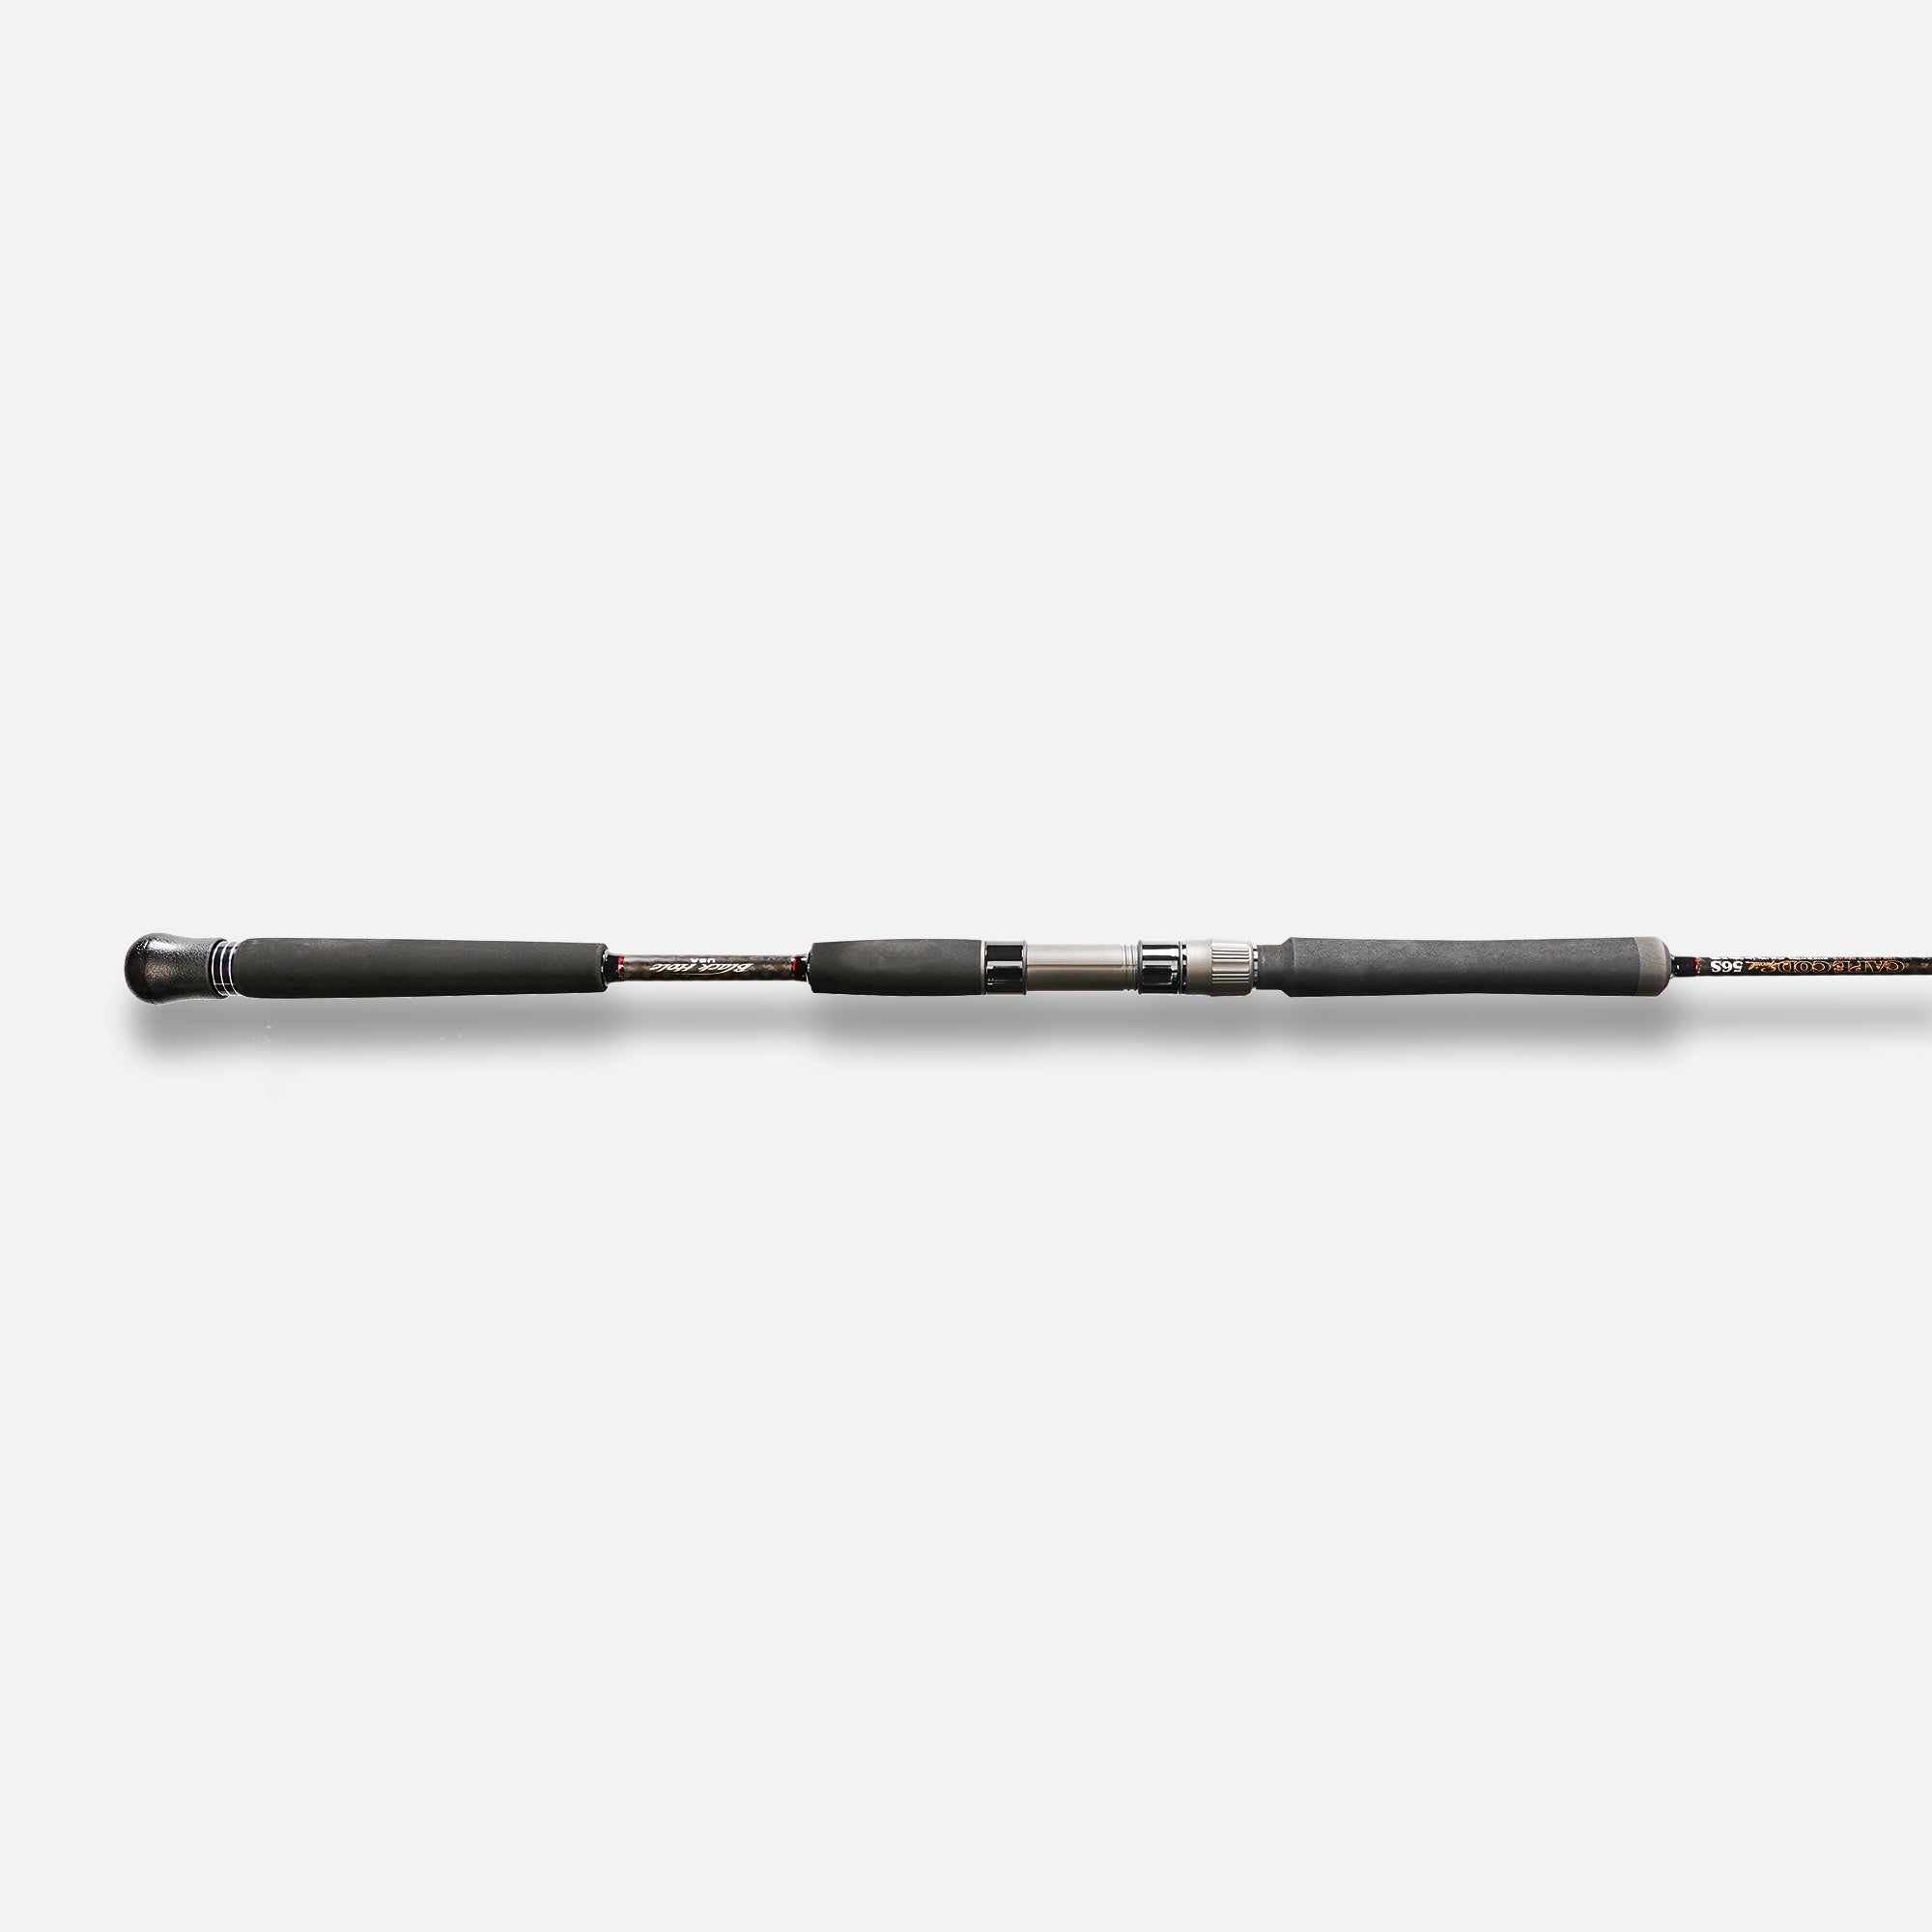 Cape Cod Special 150g 56S Spinning Rod